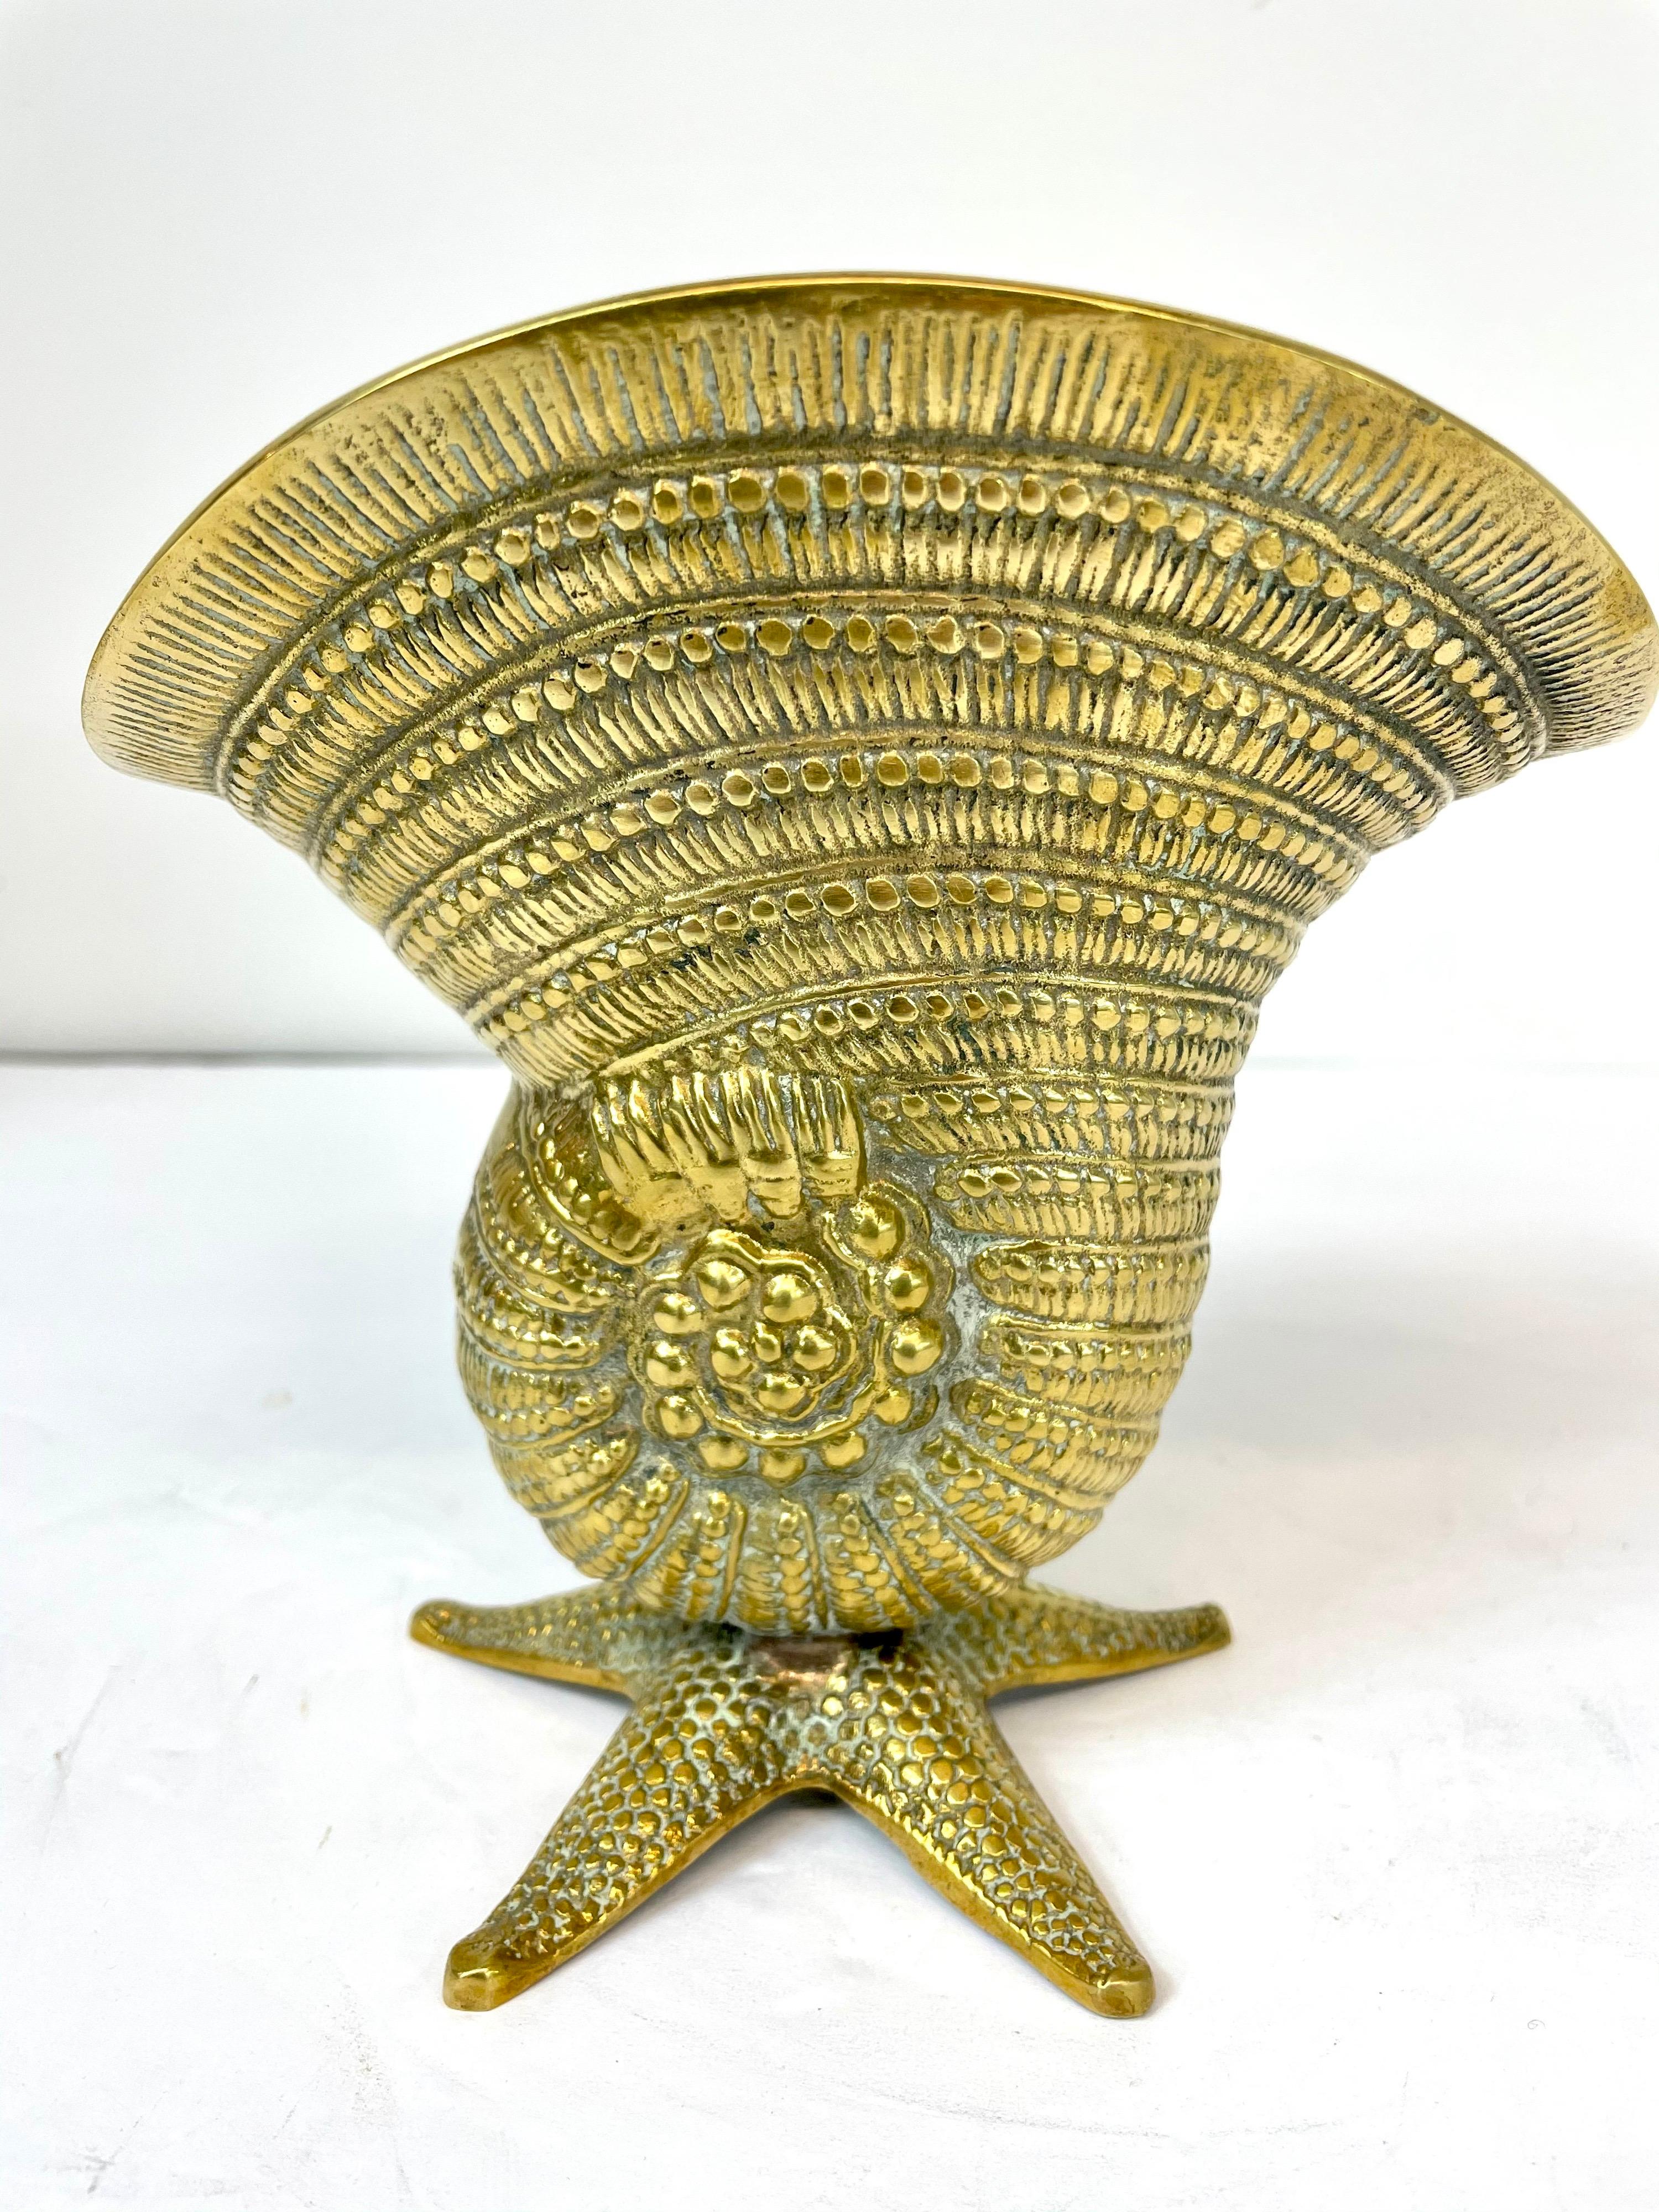 Brass sea shell on starfish base. Hand polished. Nice statement piece. Very unusual design with nice detail. Overall nice condition. Ready for your beach house! 